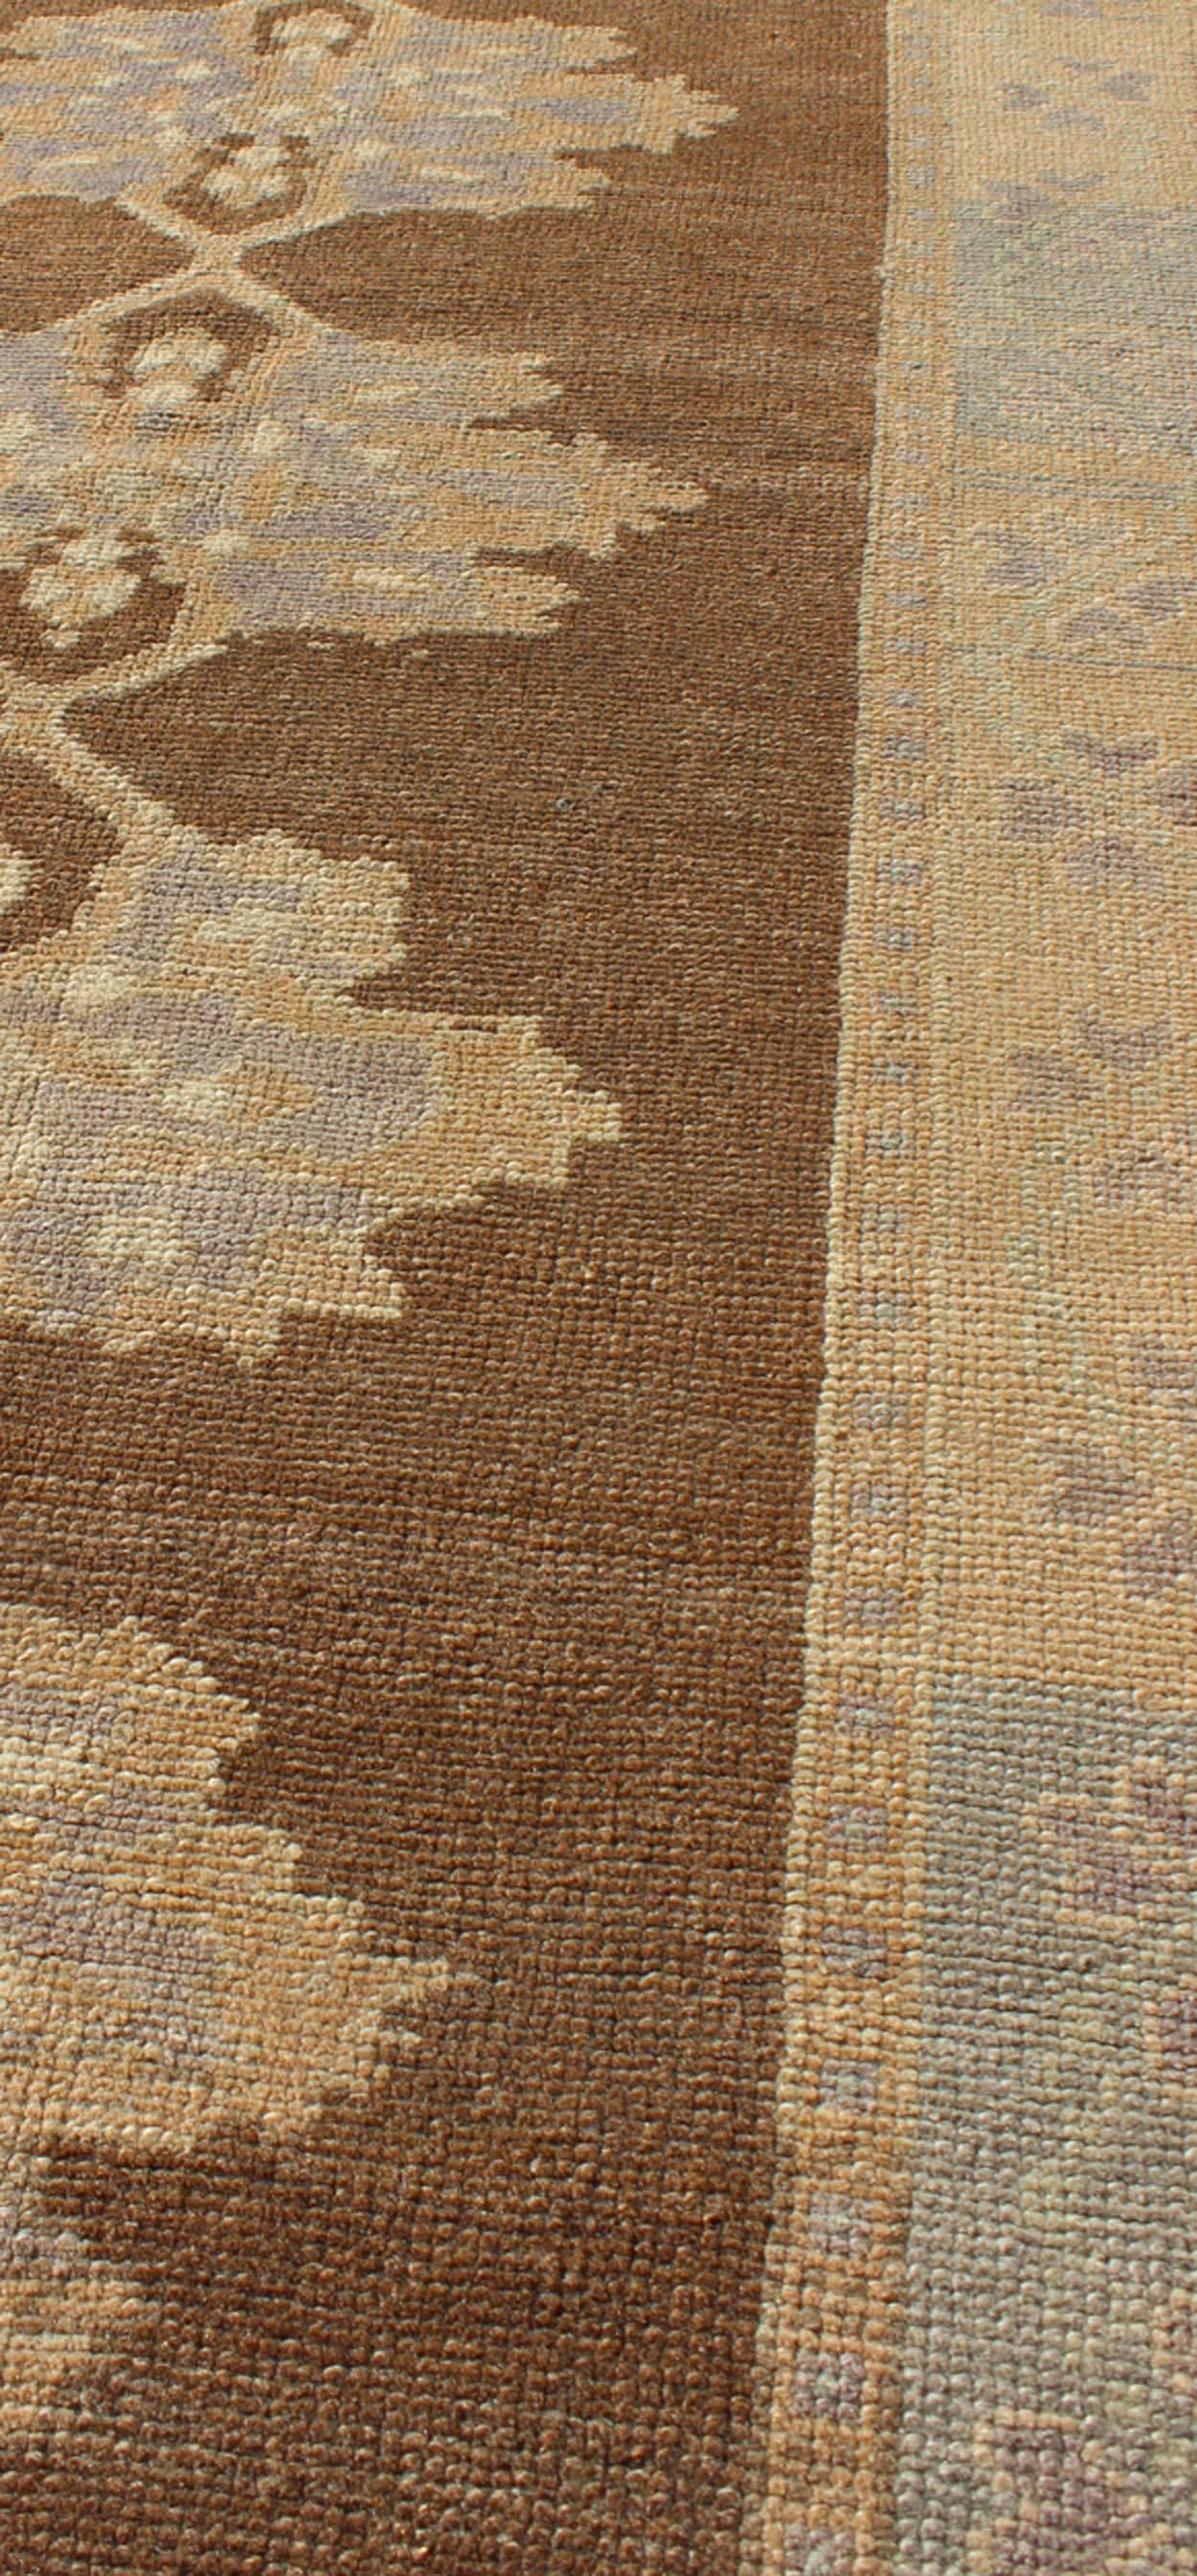 Mid-20th Century Earth-Tone Vintage Turkish Oushak Runner with Blossom Medallion Design For Sale